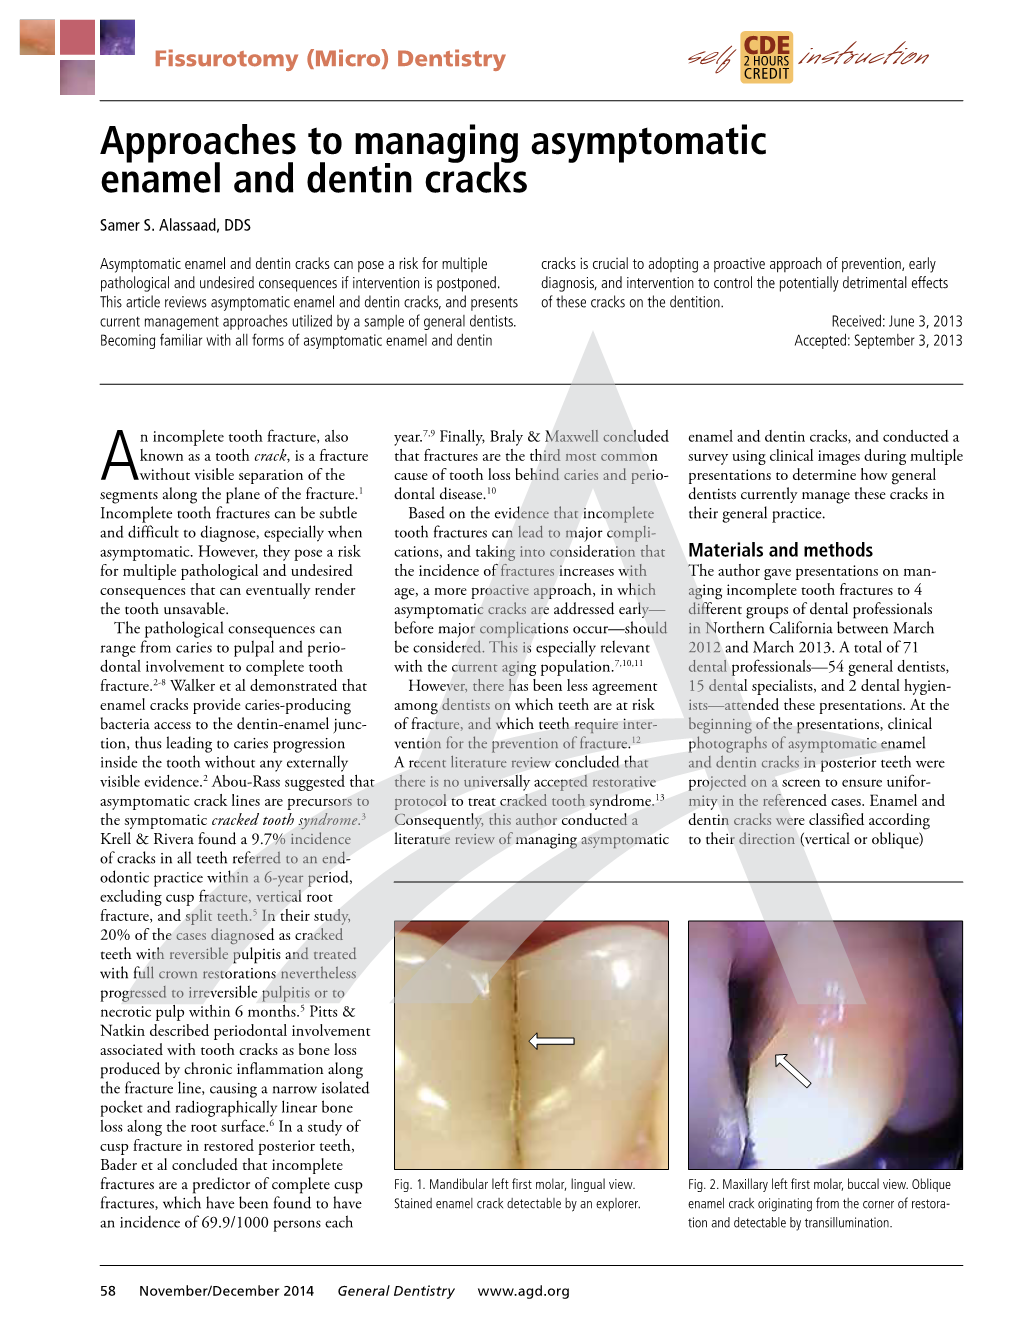 Approaches to Managing Asymptomatic Enamel and Dentin Cracks Samer S